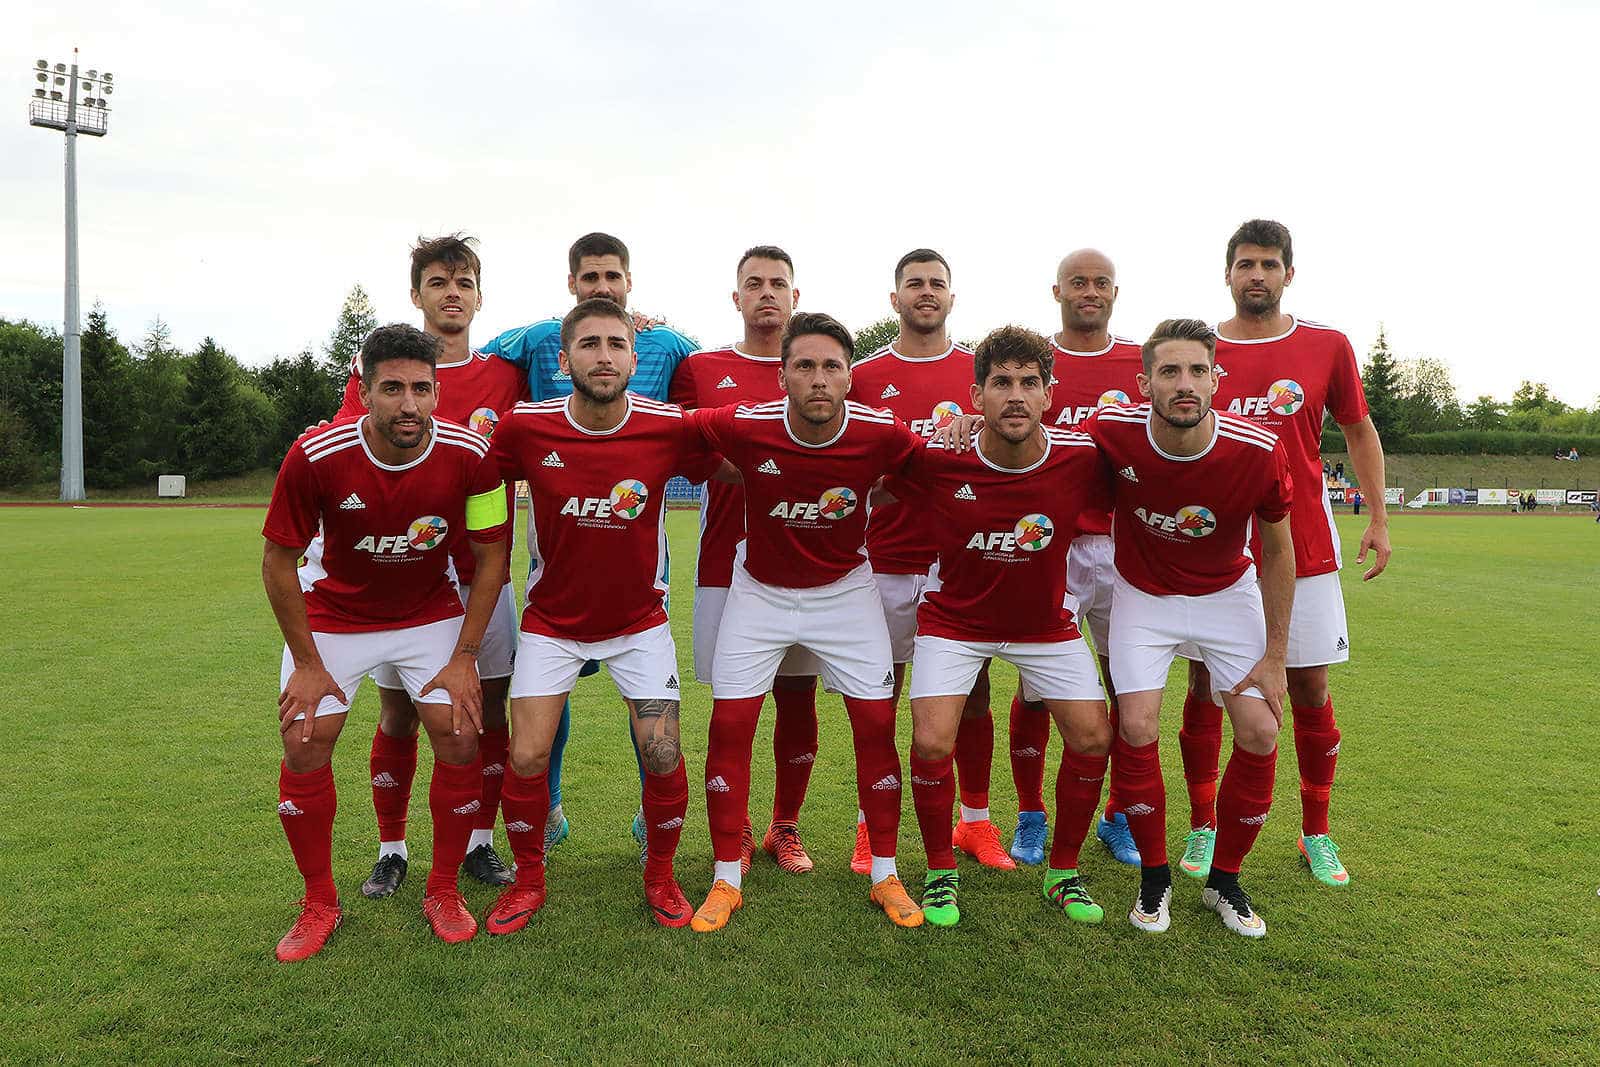 Torneo FIFPro 2018